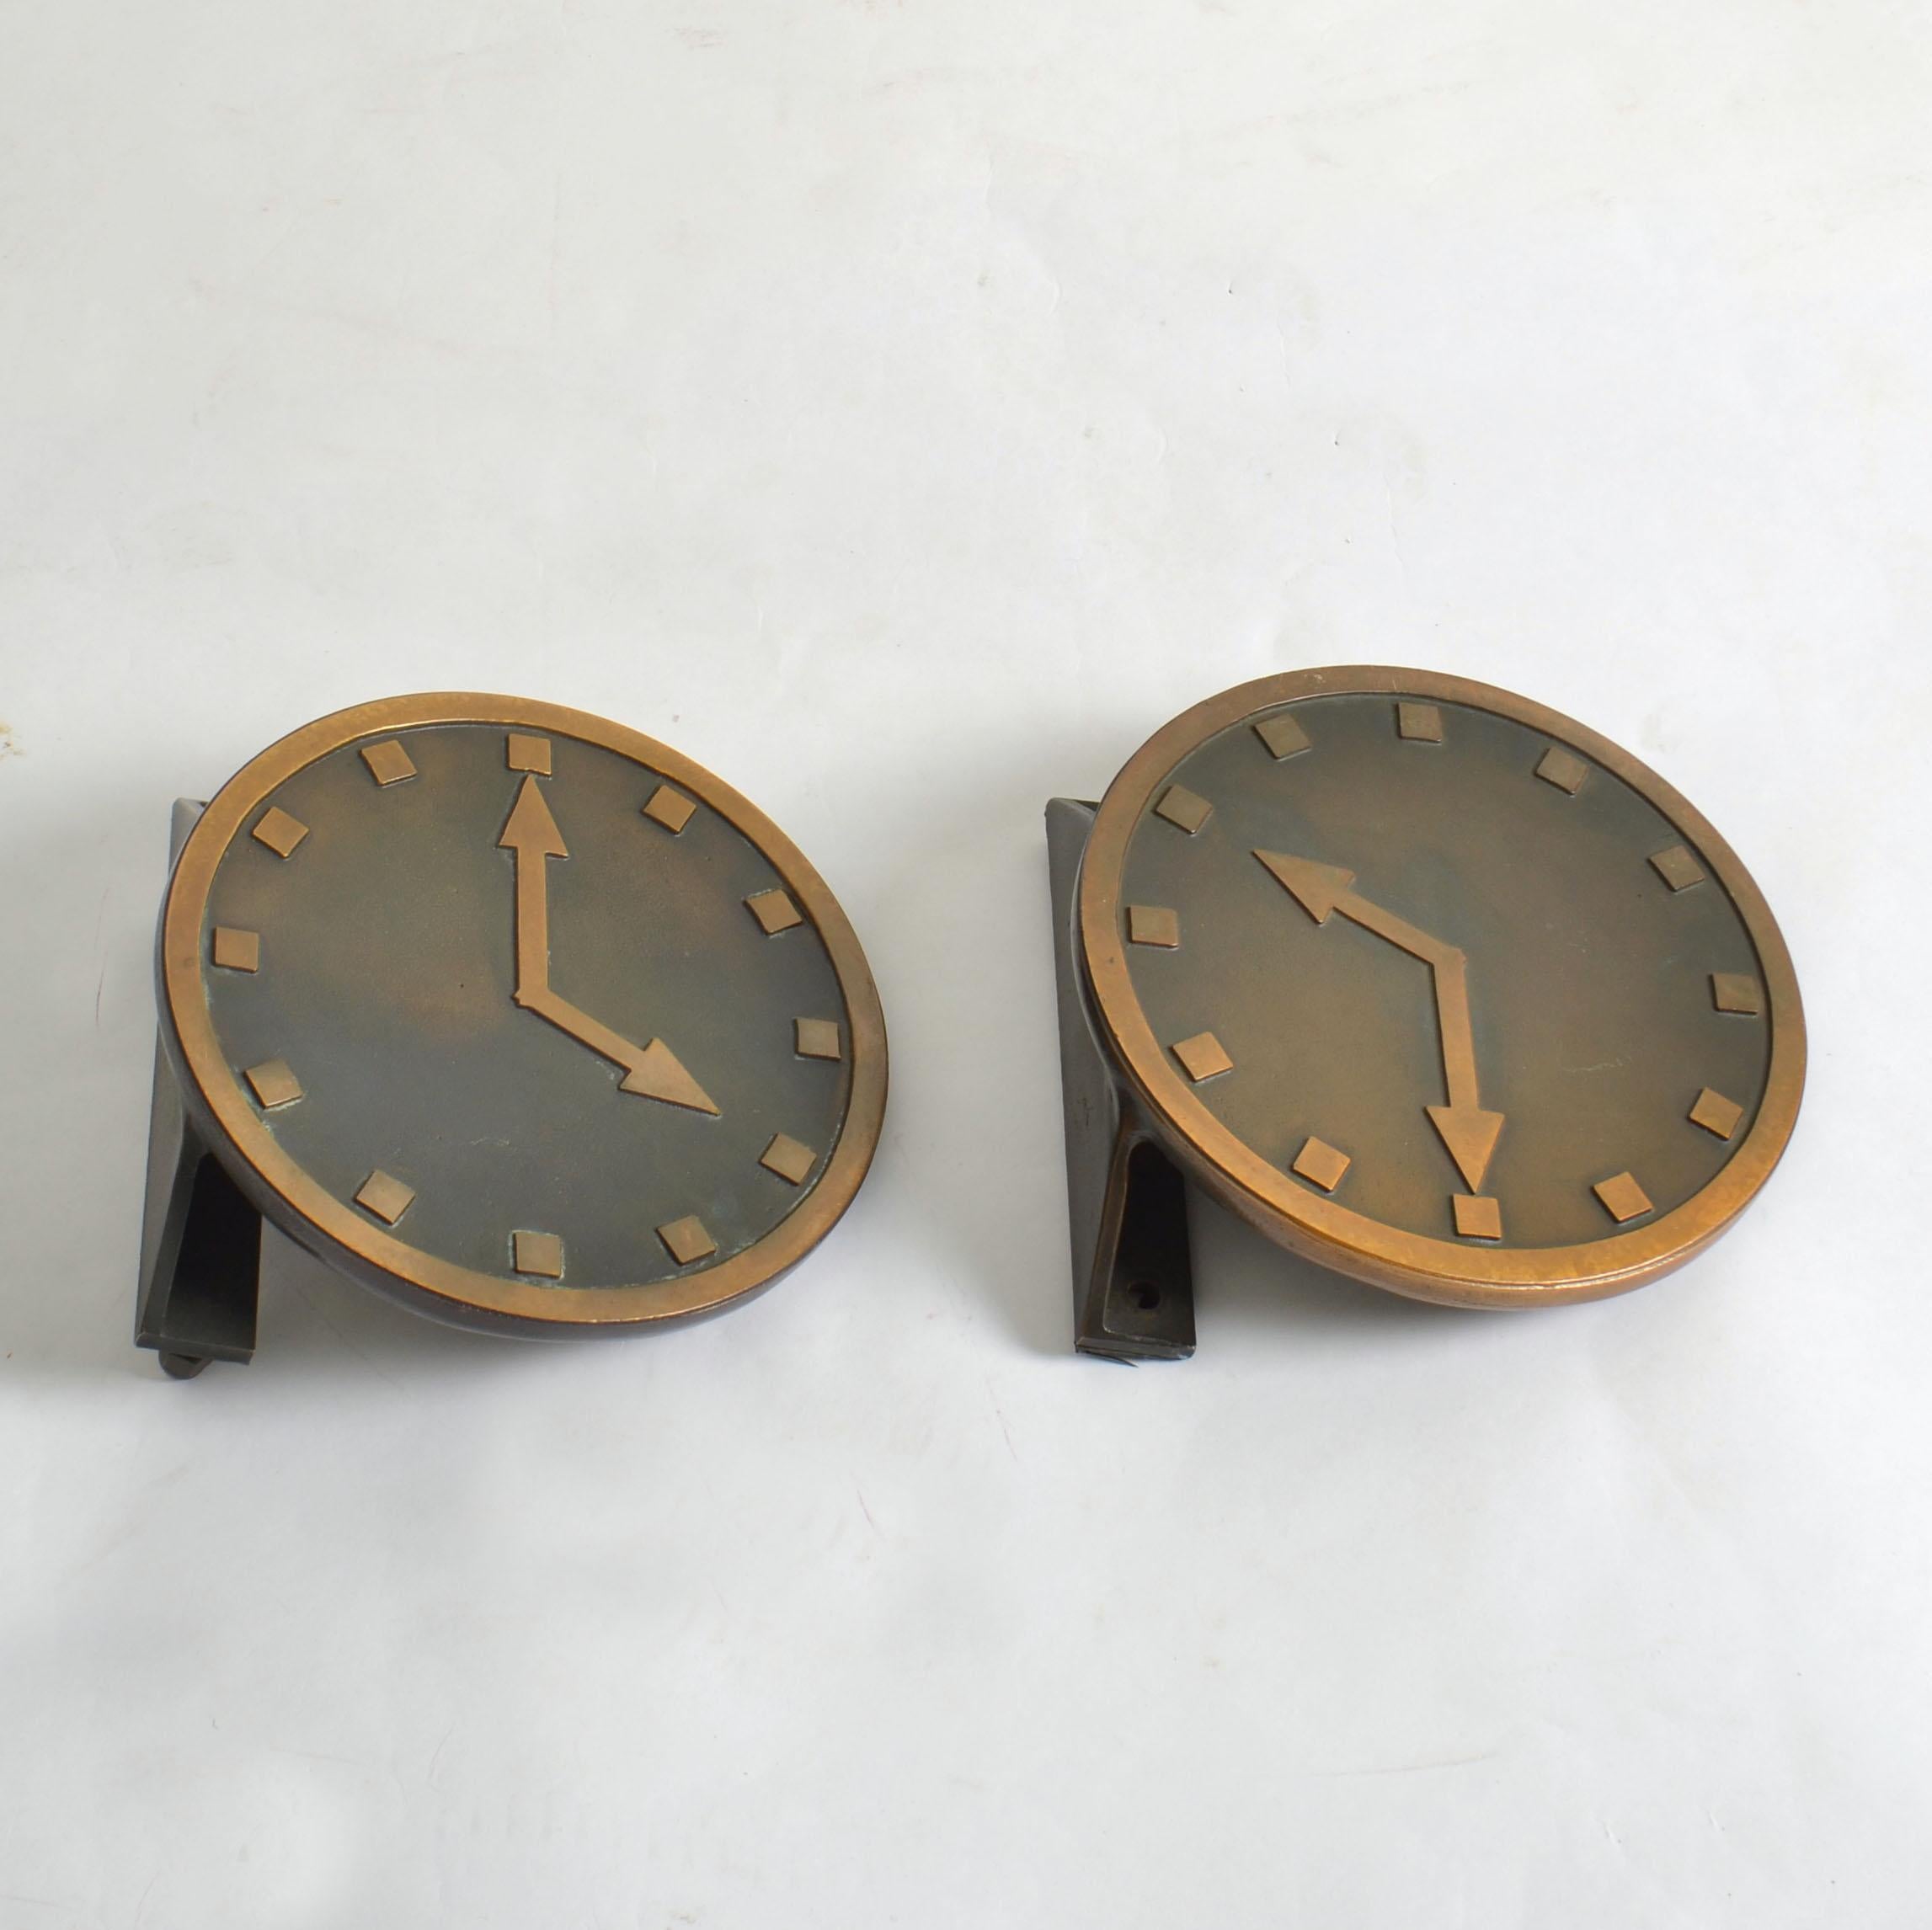 Architectural Pair of Bronze Push and Pull Door Handles as Clocks 1